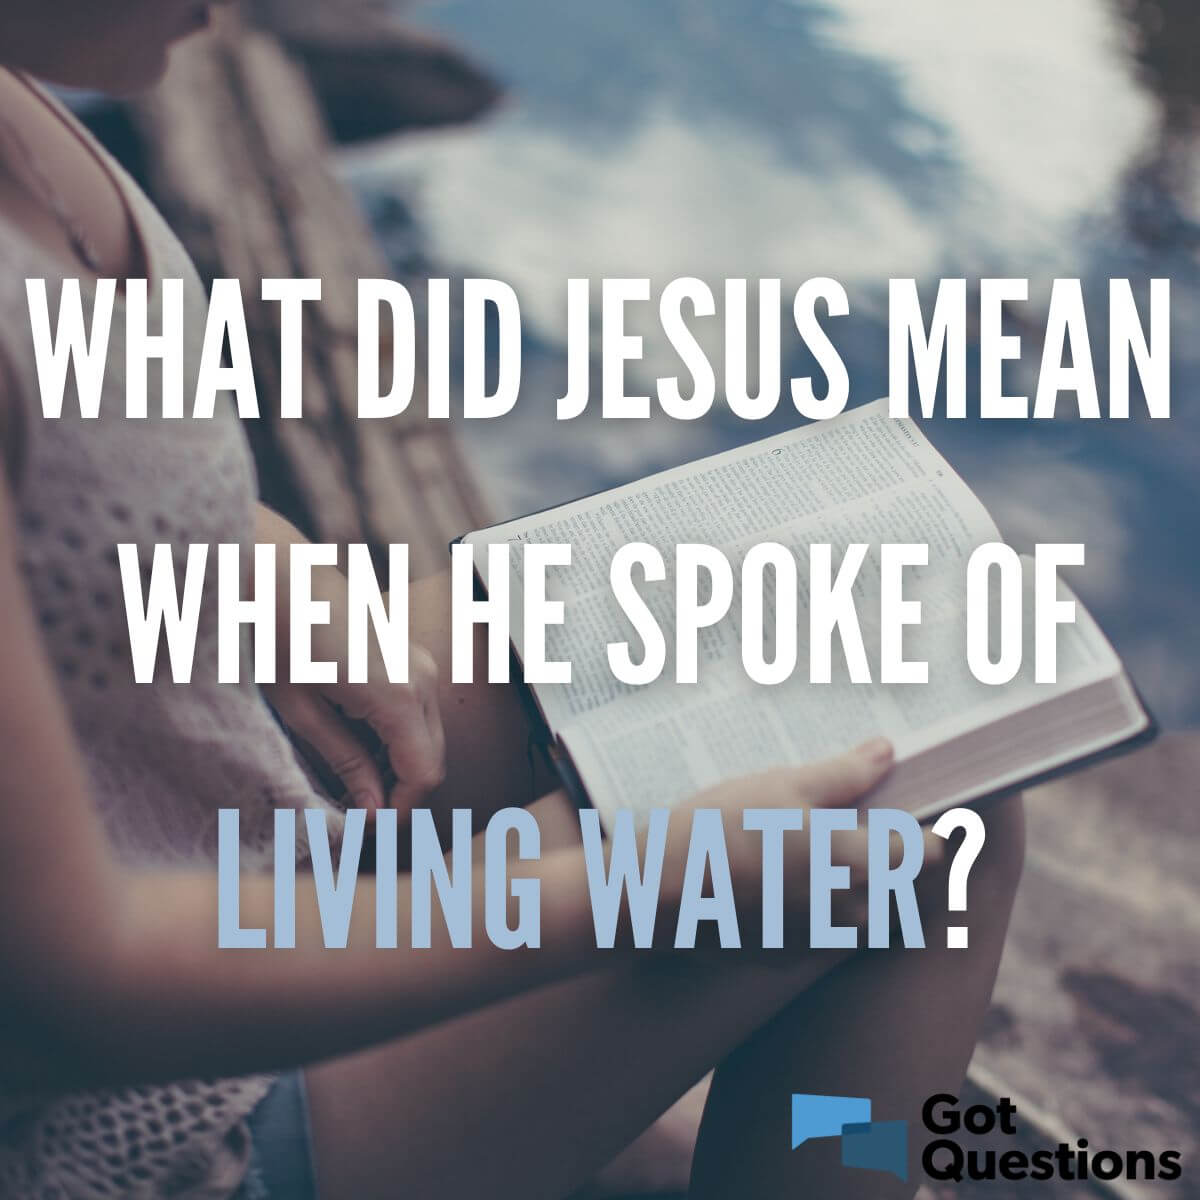 What did Jesus mean when He spoke of living water?